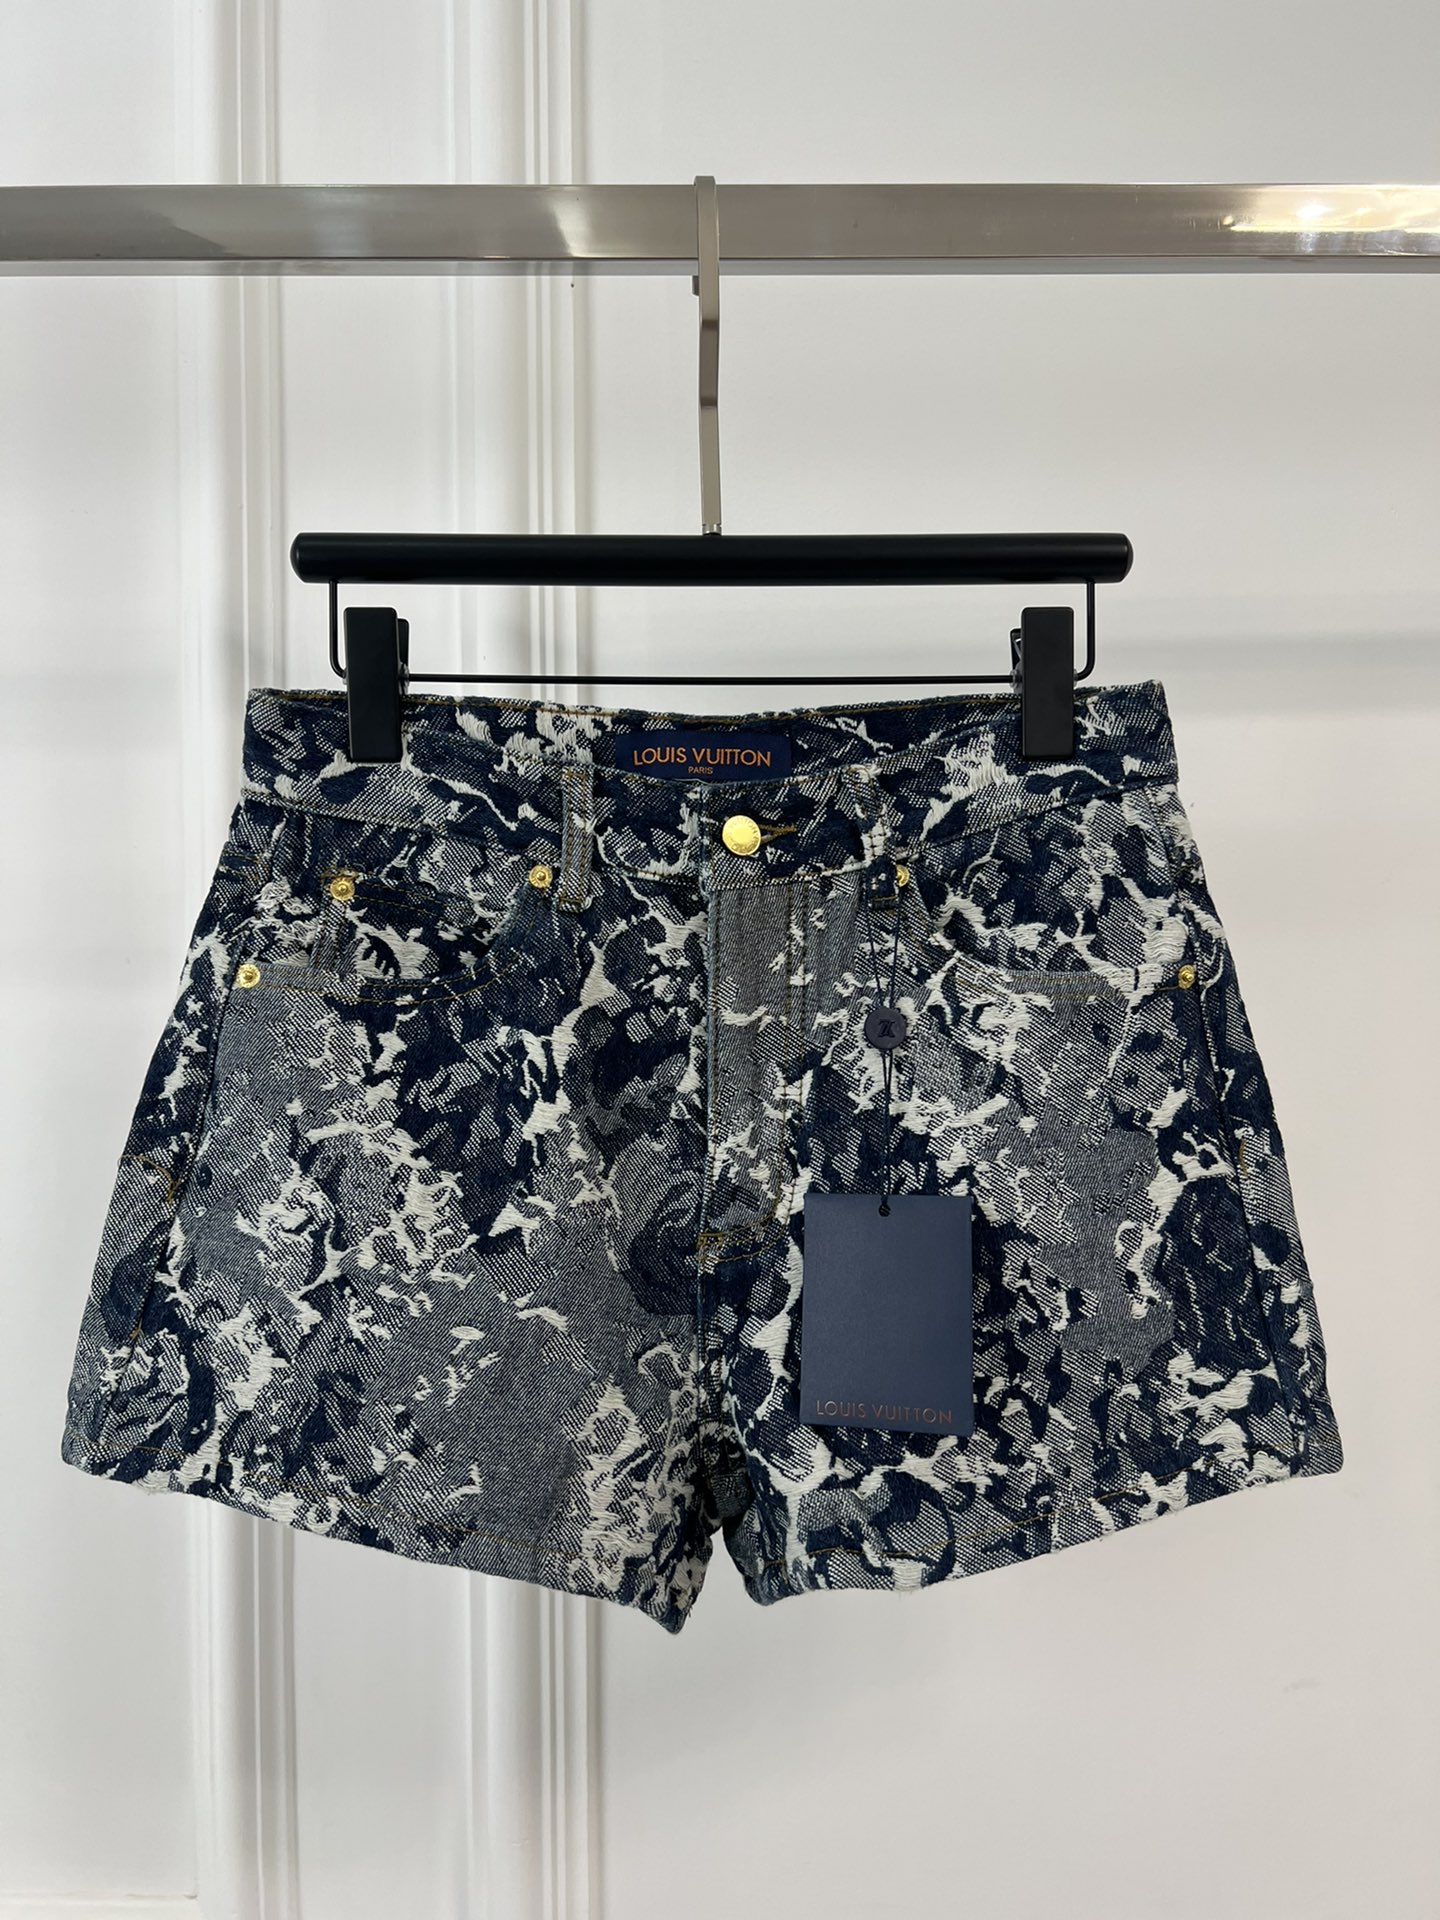 Louis Vuitton Clothing Jeans Shorts Summer Collection